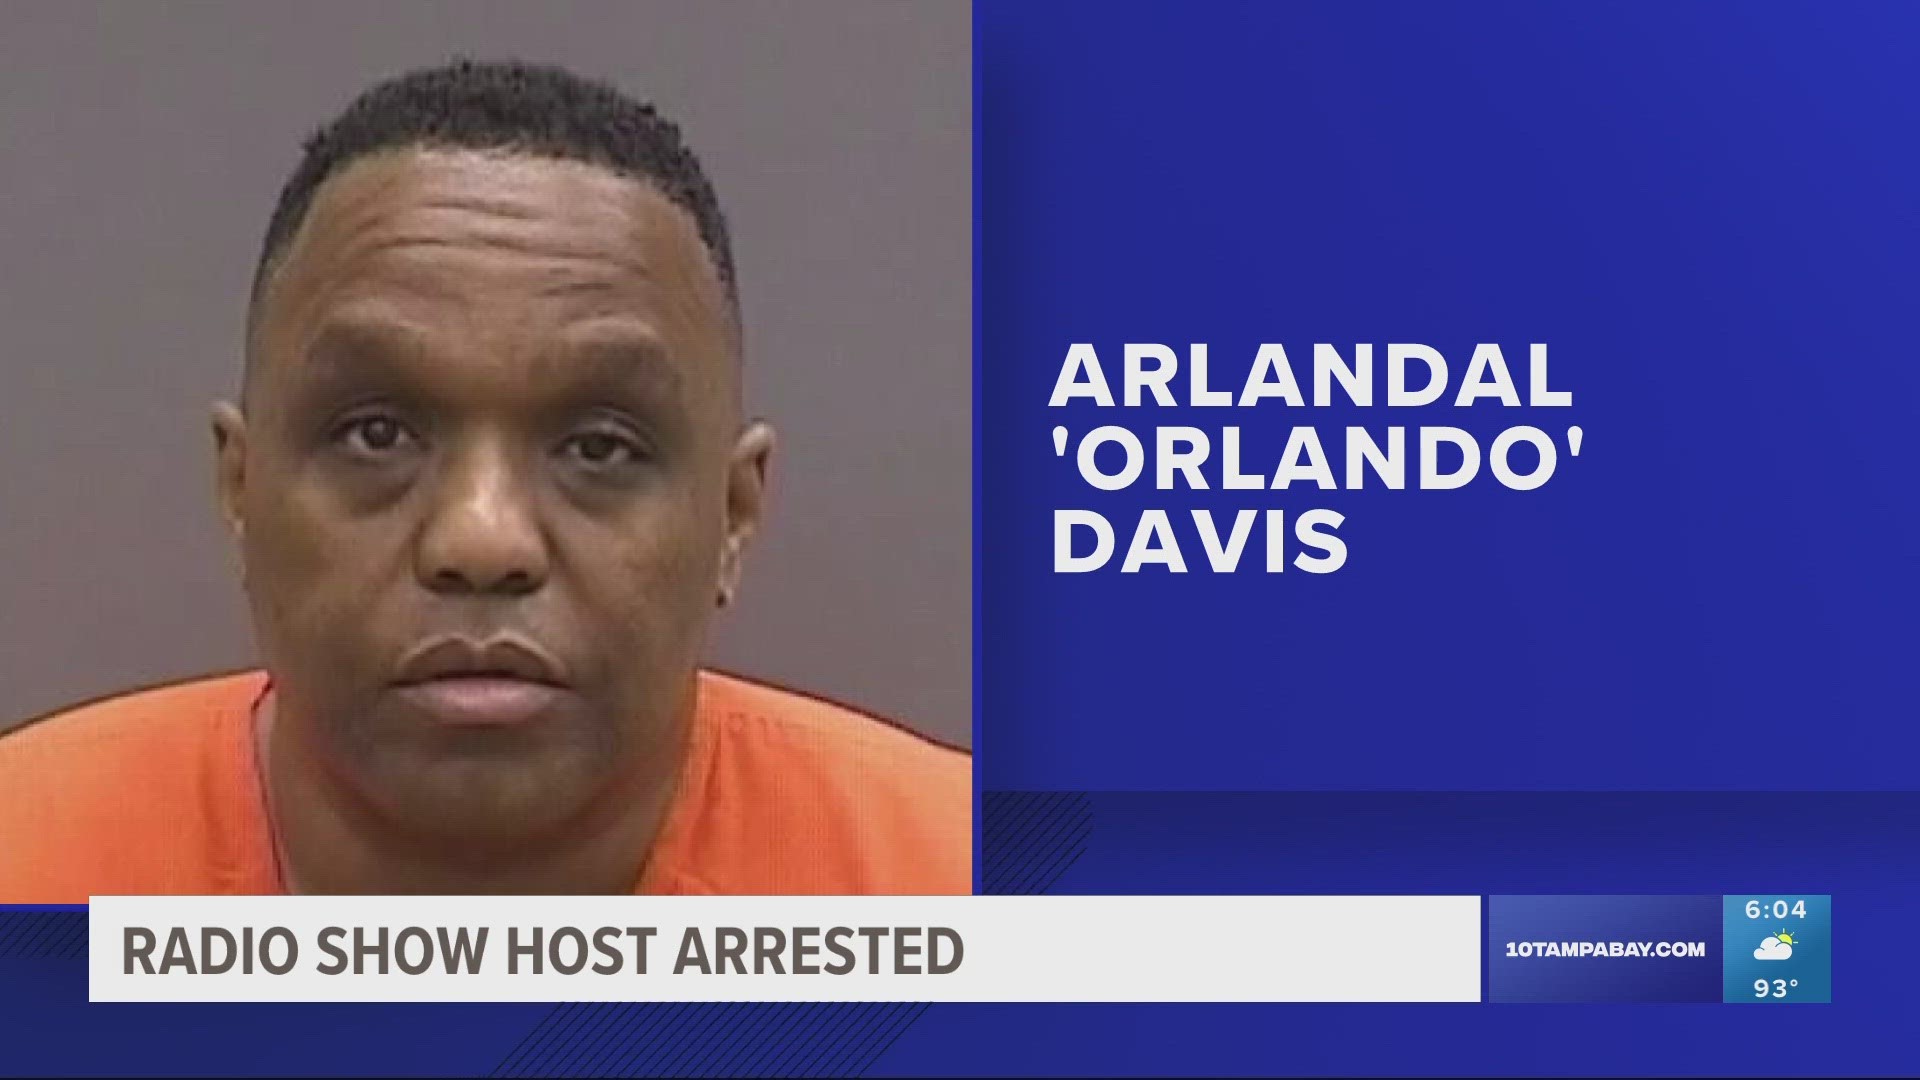 Arlandal "Orlando" Davis was charged with DUI with property damage or physical injury.